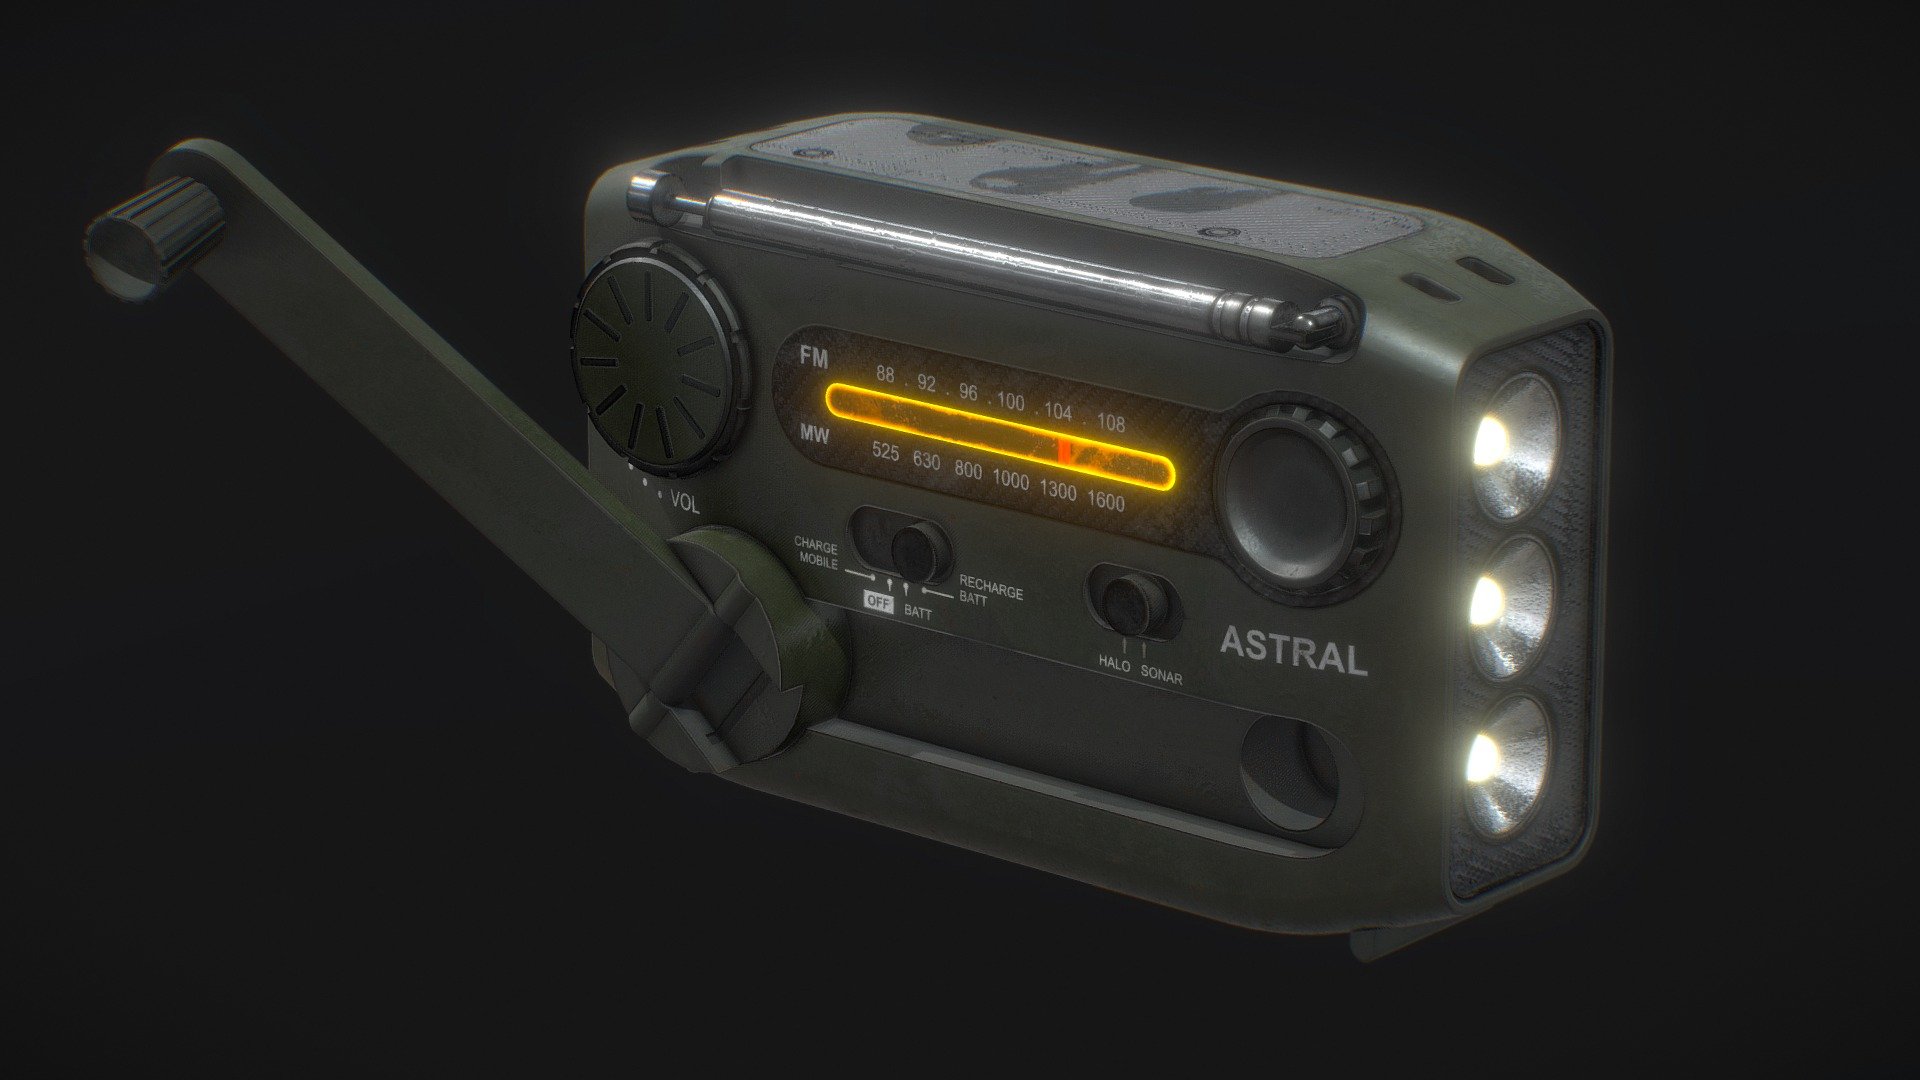 Man powered Gadget - Radio - Flashlight - Radar

Ready to use. Baked from High Poly. 4k Textures in case it is needed.

Check my profile for free models https://sketchfab.com/re1monsen If you enjoy my work please consider supporting me I have many affordable models in the shop. 

Feel free to contact me. I’d love yo hear from you.

Thanks! - Gadget - Radio - Flashlight - Radar - Download Free 3D model by re1monsen 3d model